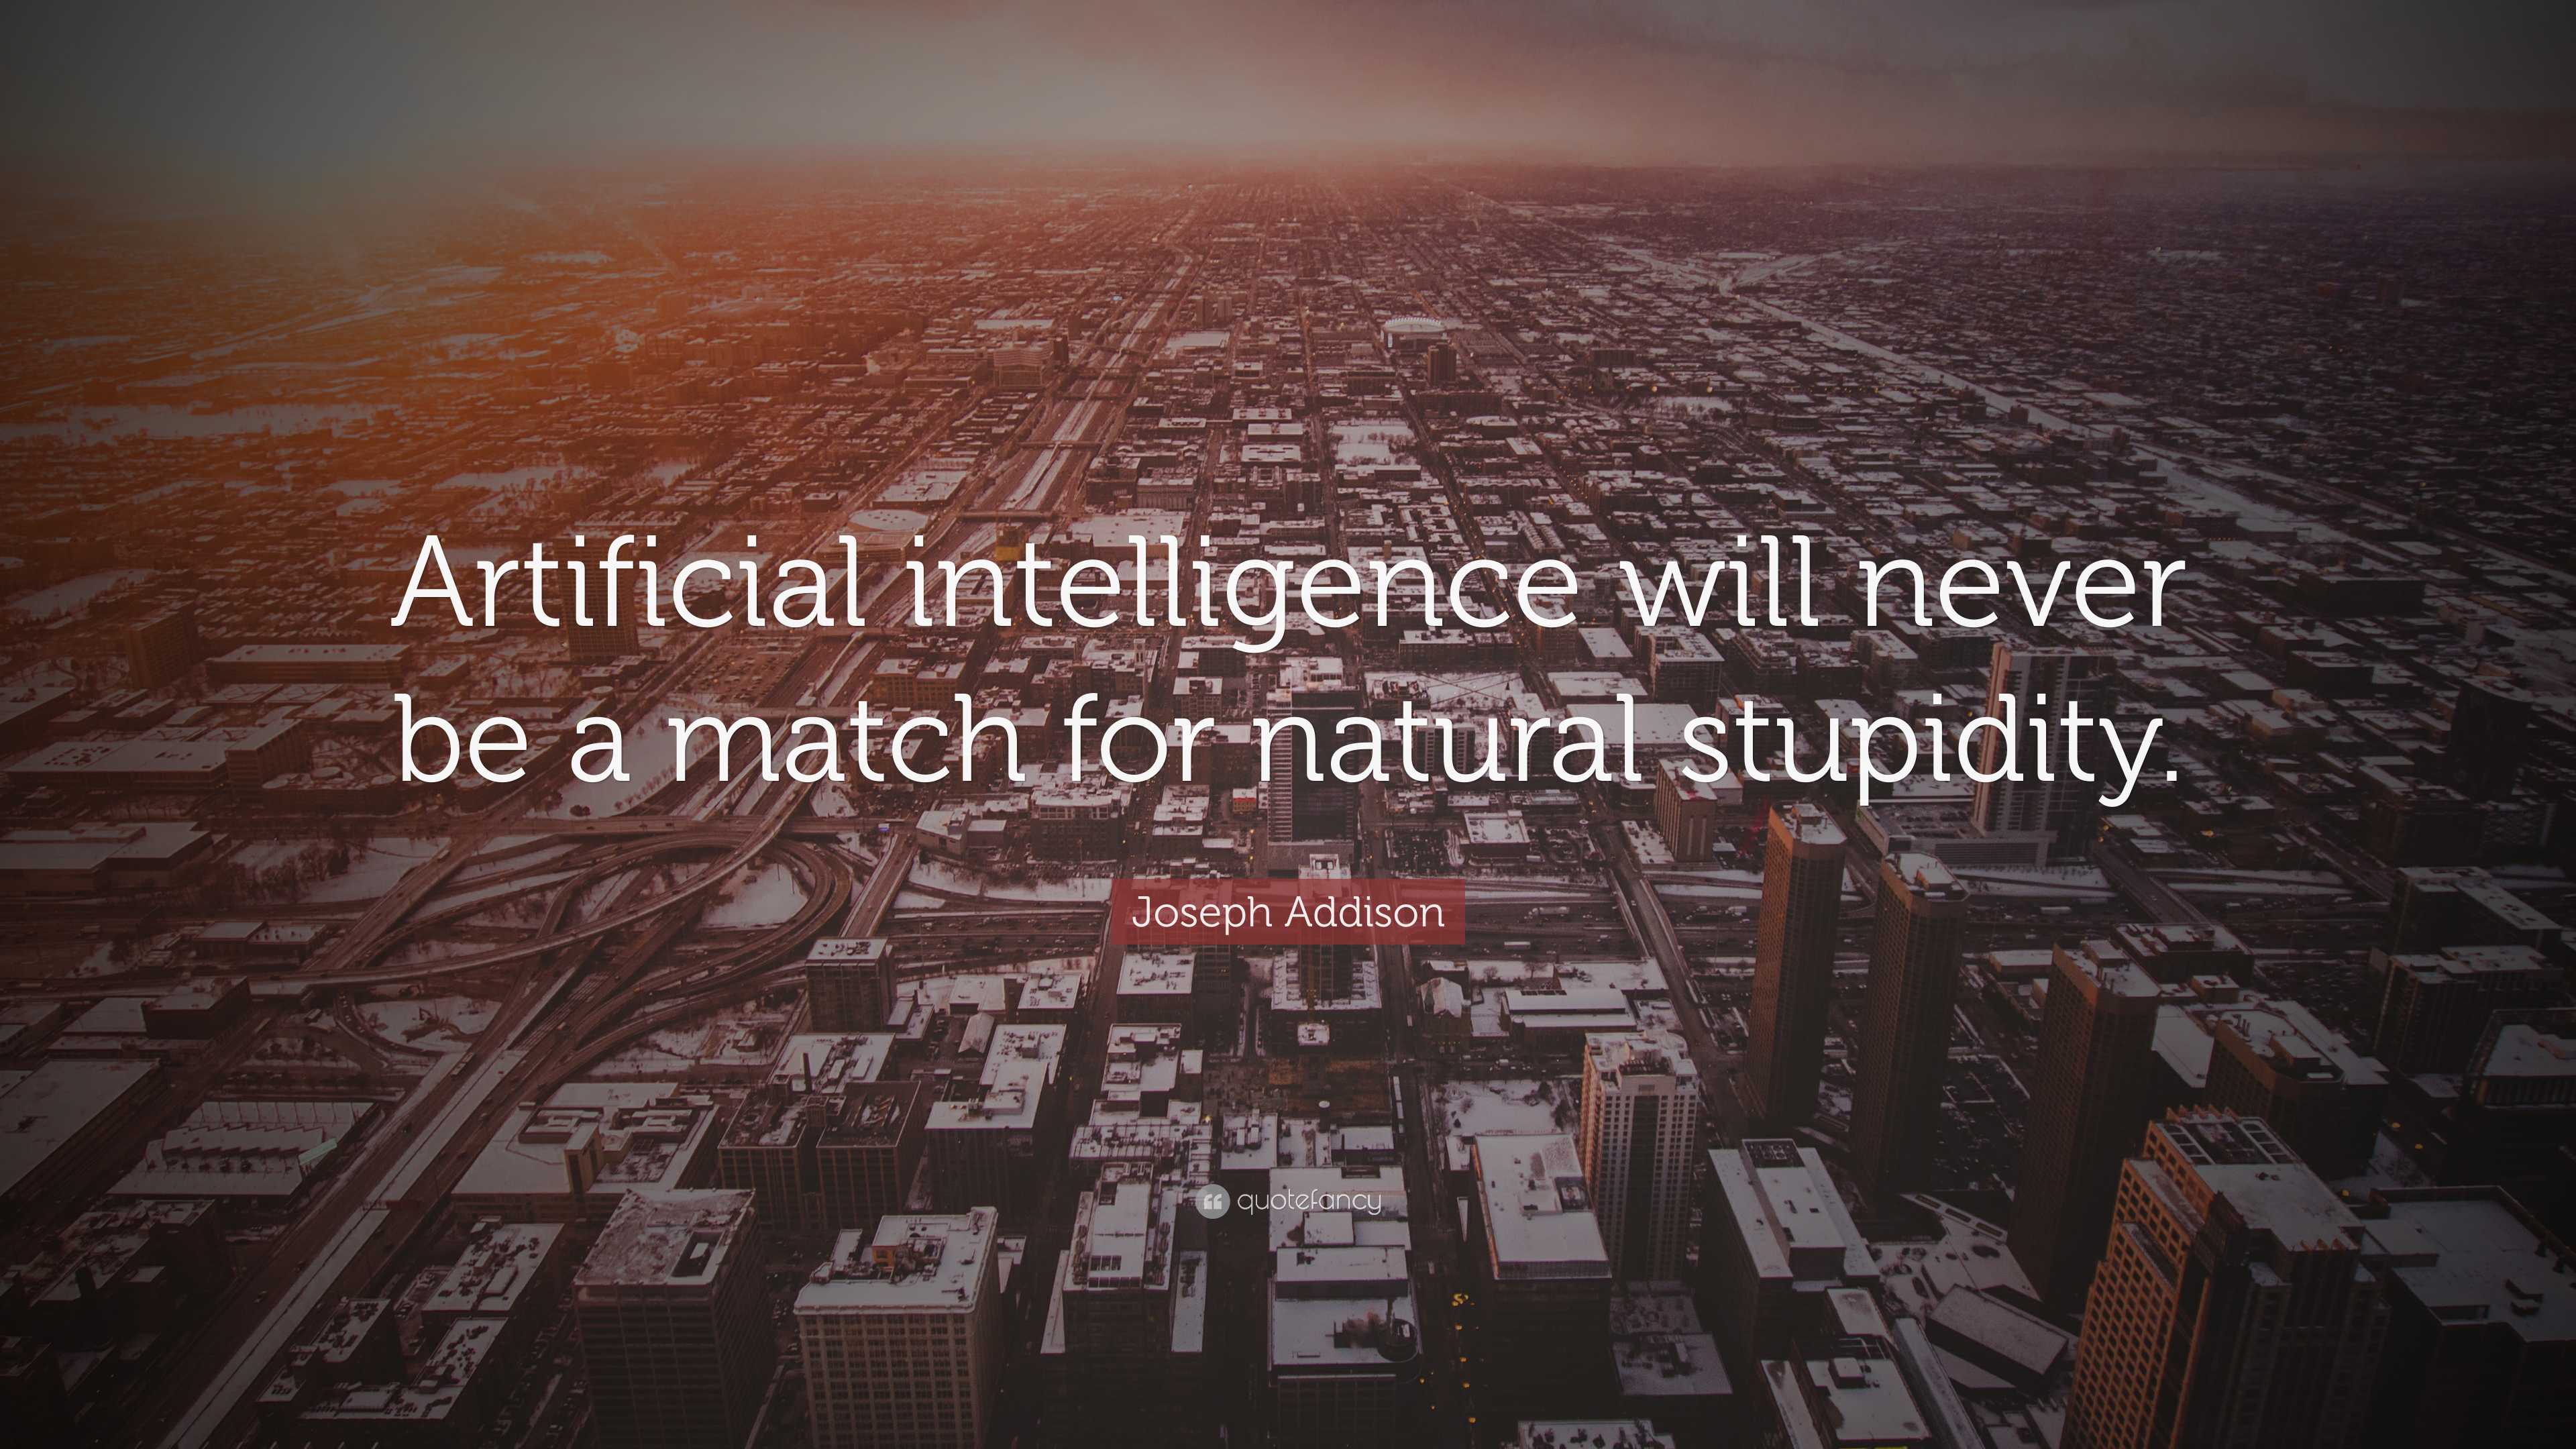 Joseph Addison Quote: “Artificial intelligence will never be a match ...